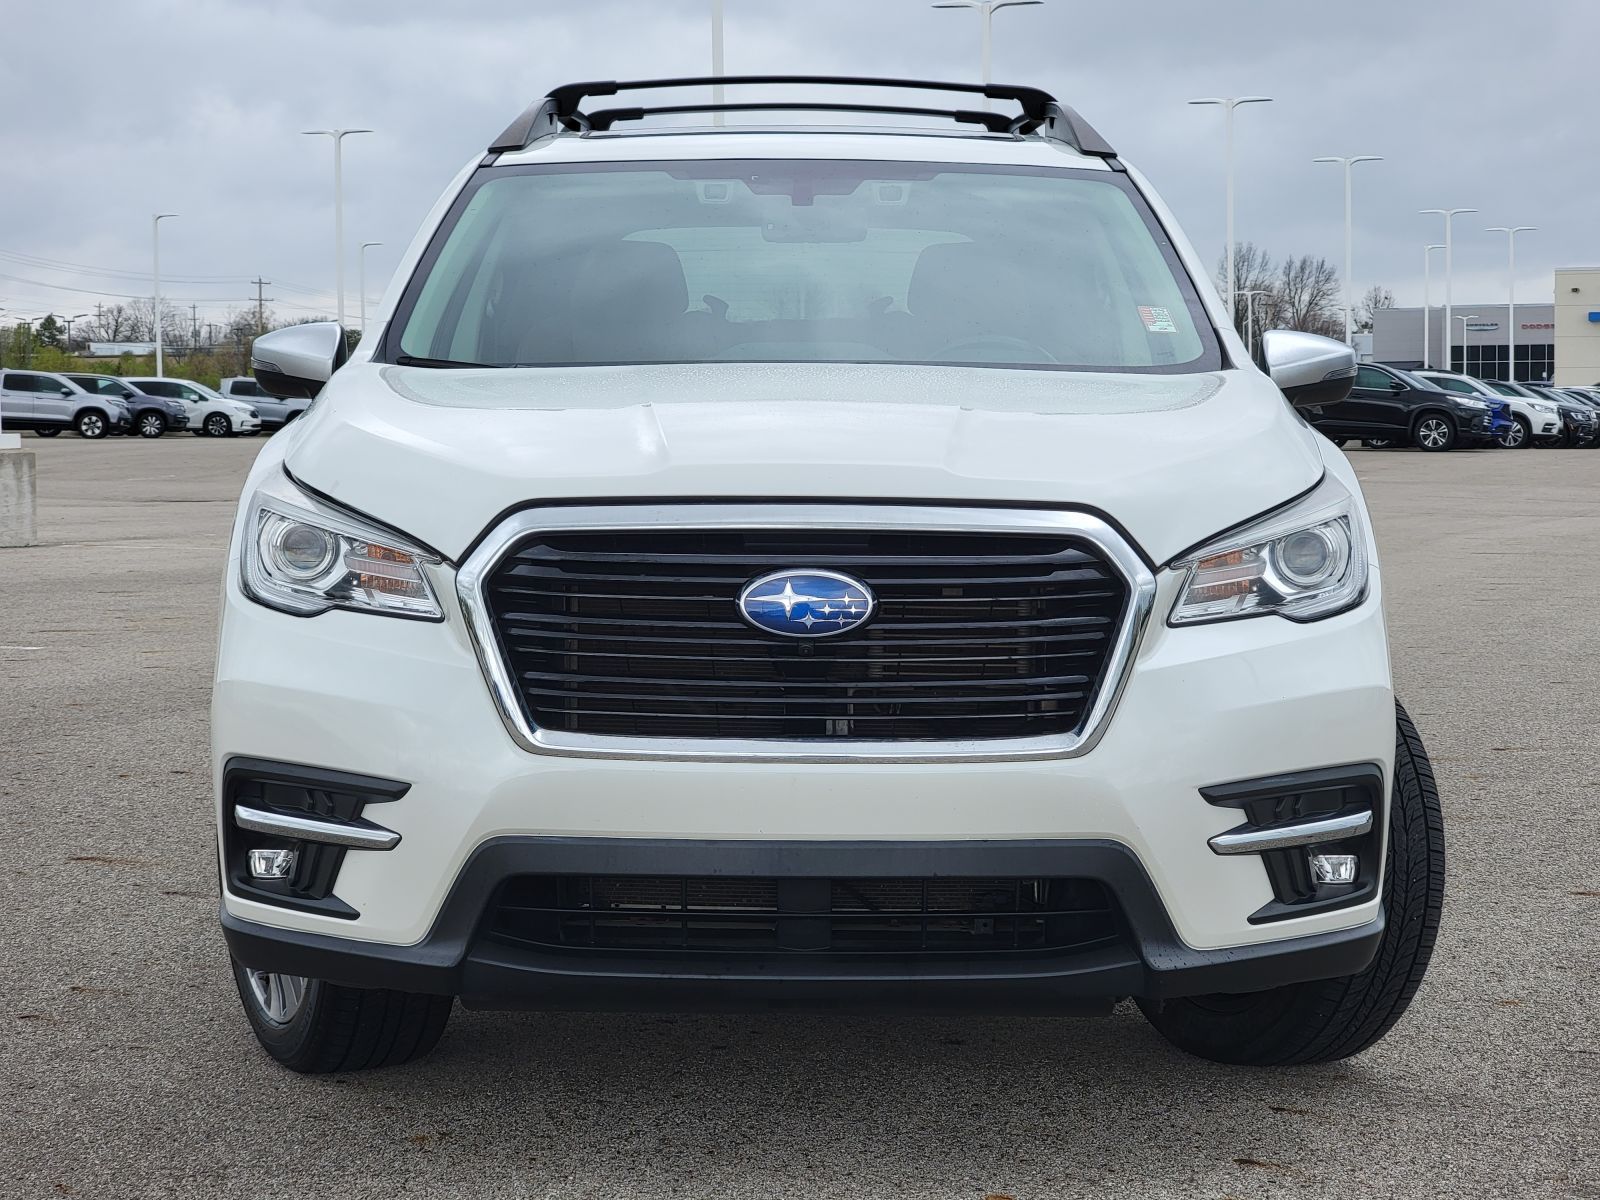 Used, 2019 Subaru Ascent Touring, White, G0131A-12